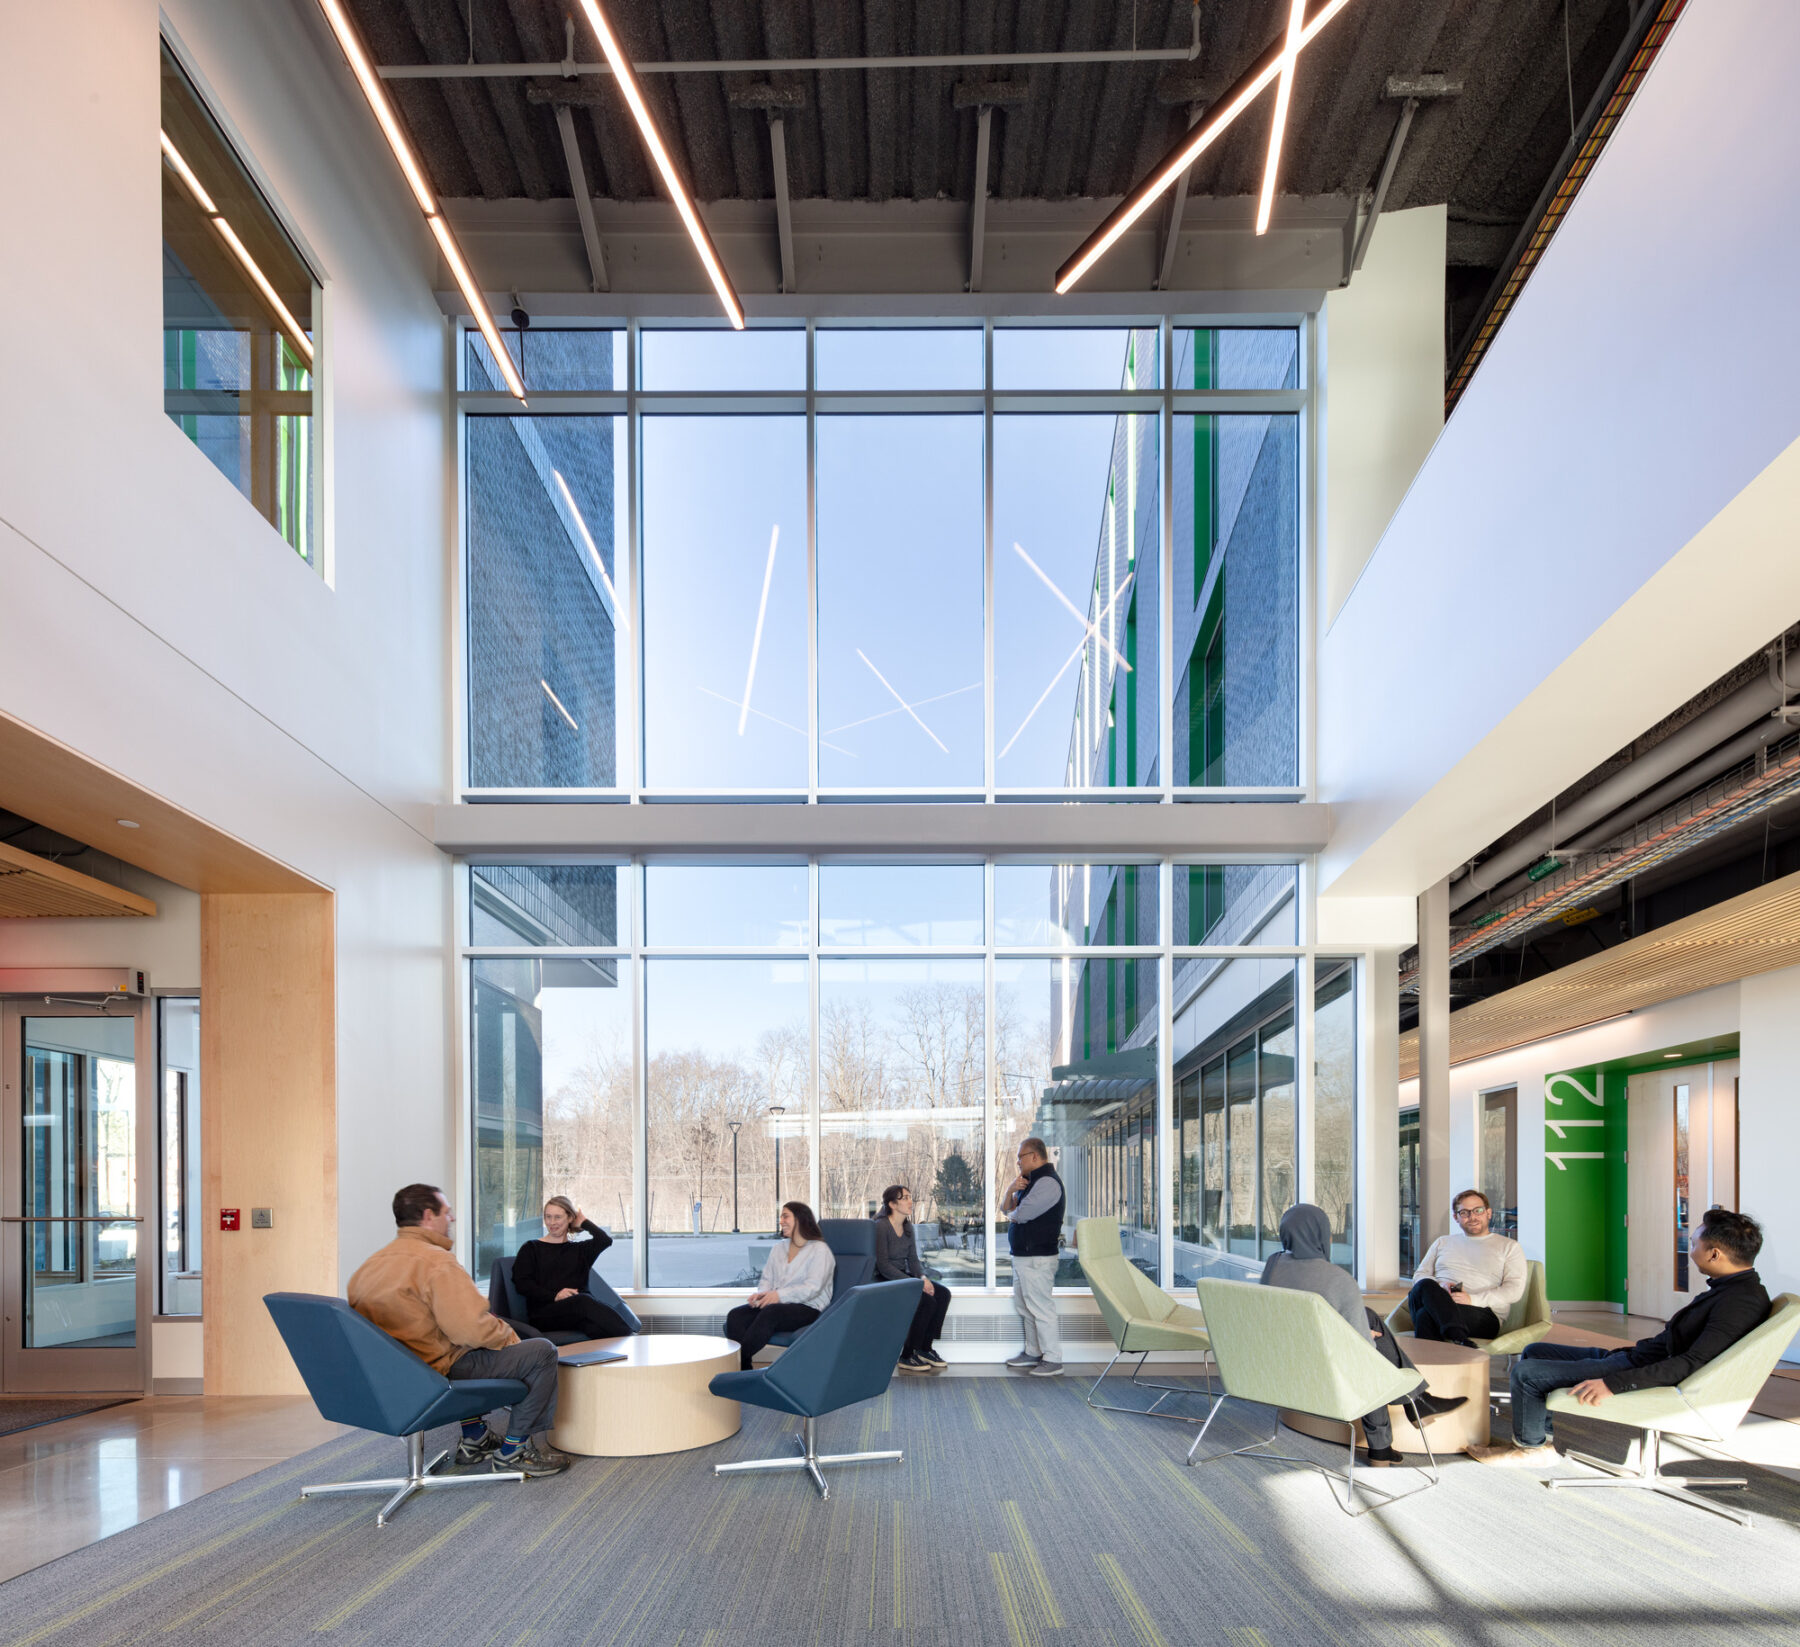 photograph of student socializing in central lobby featuring high ceilings and large windows, and custom furnishings